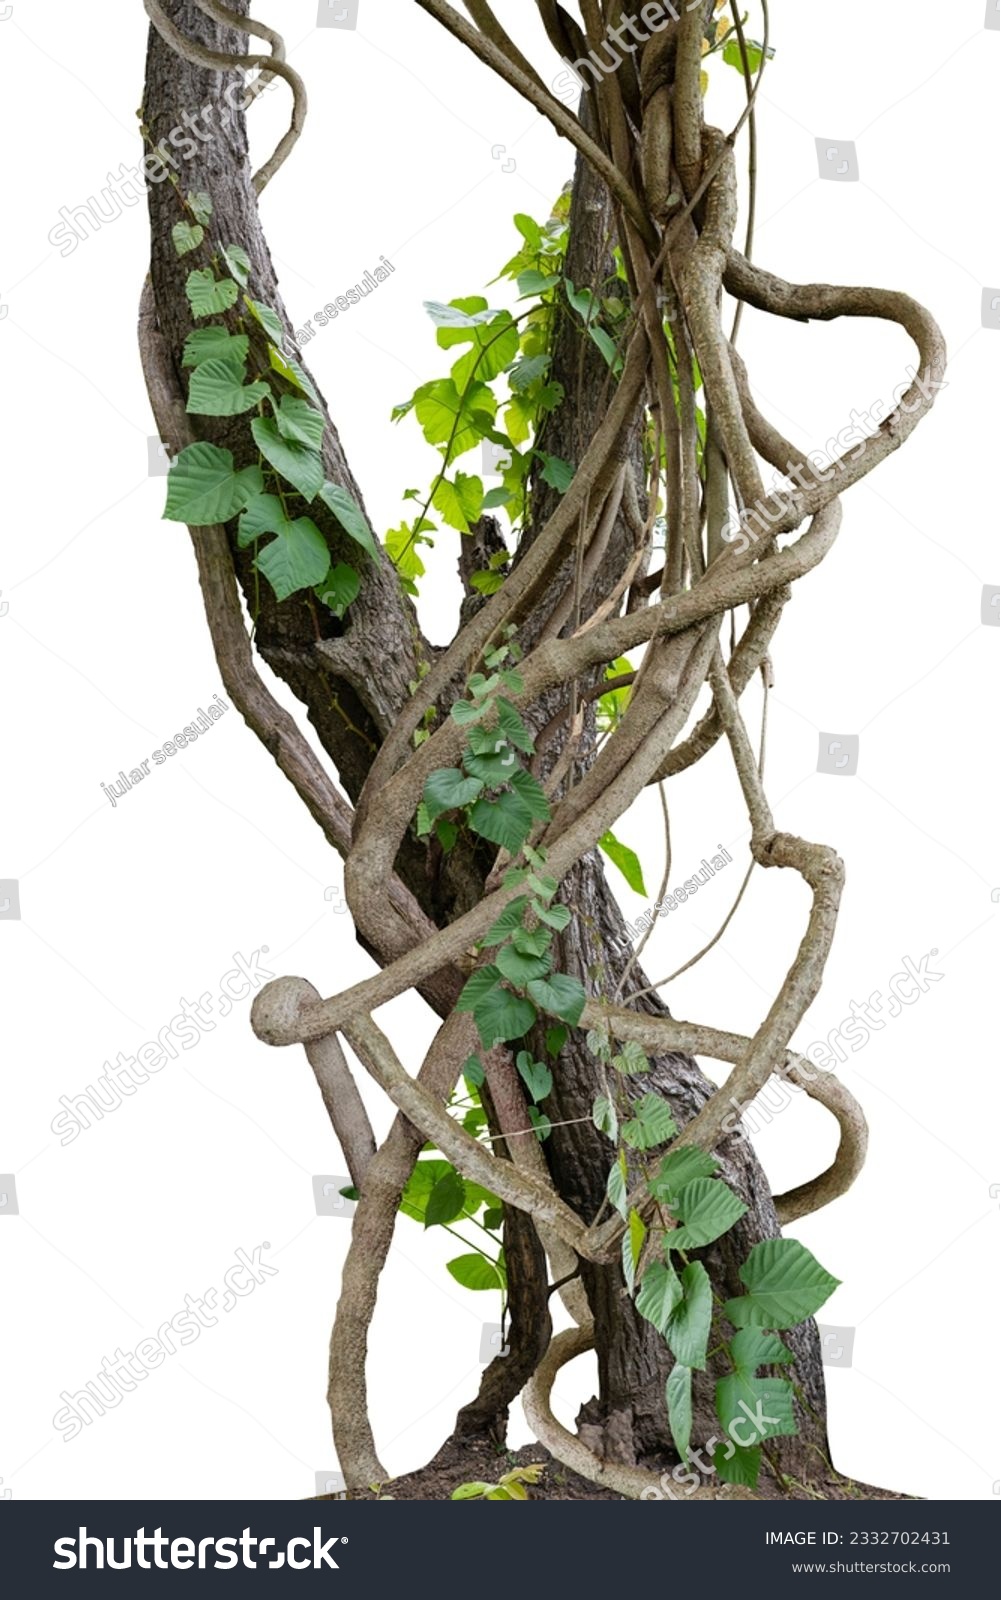 Forest tree trunks with climbing vines twisted liana plant and green leaves  isolated on white background, clipping path included. #2332702431